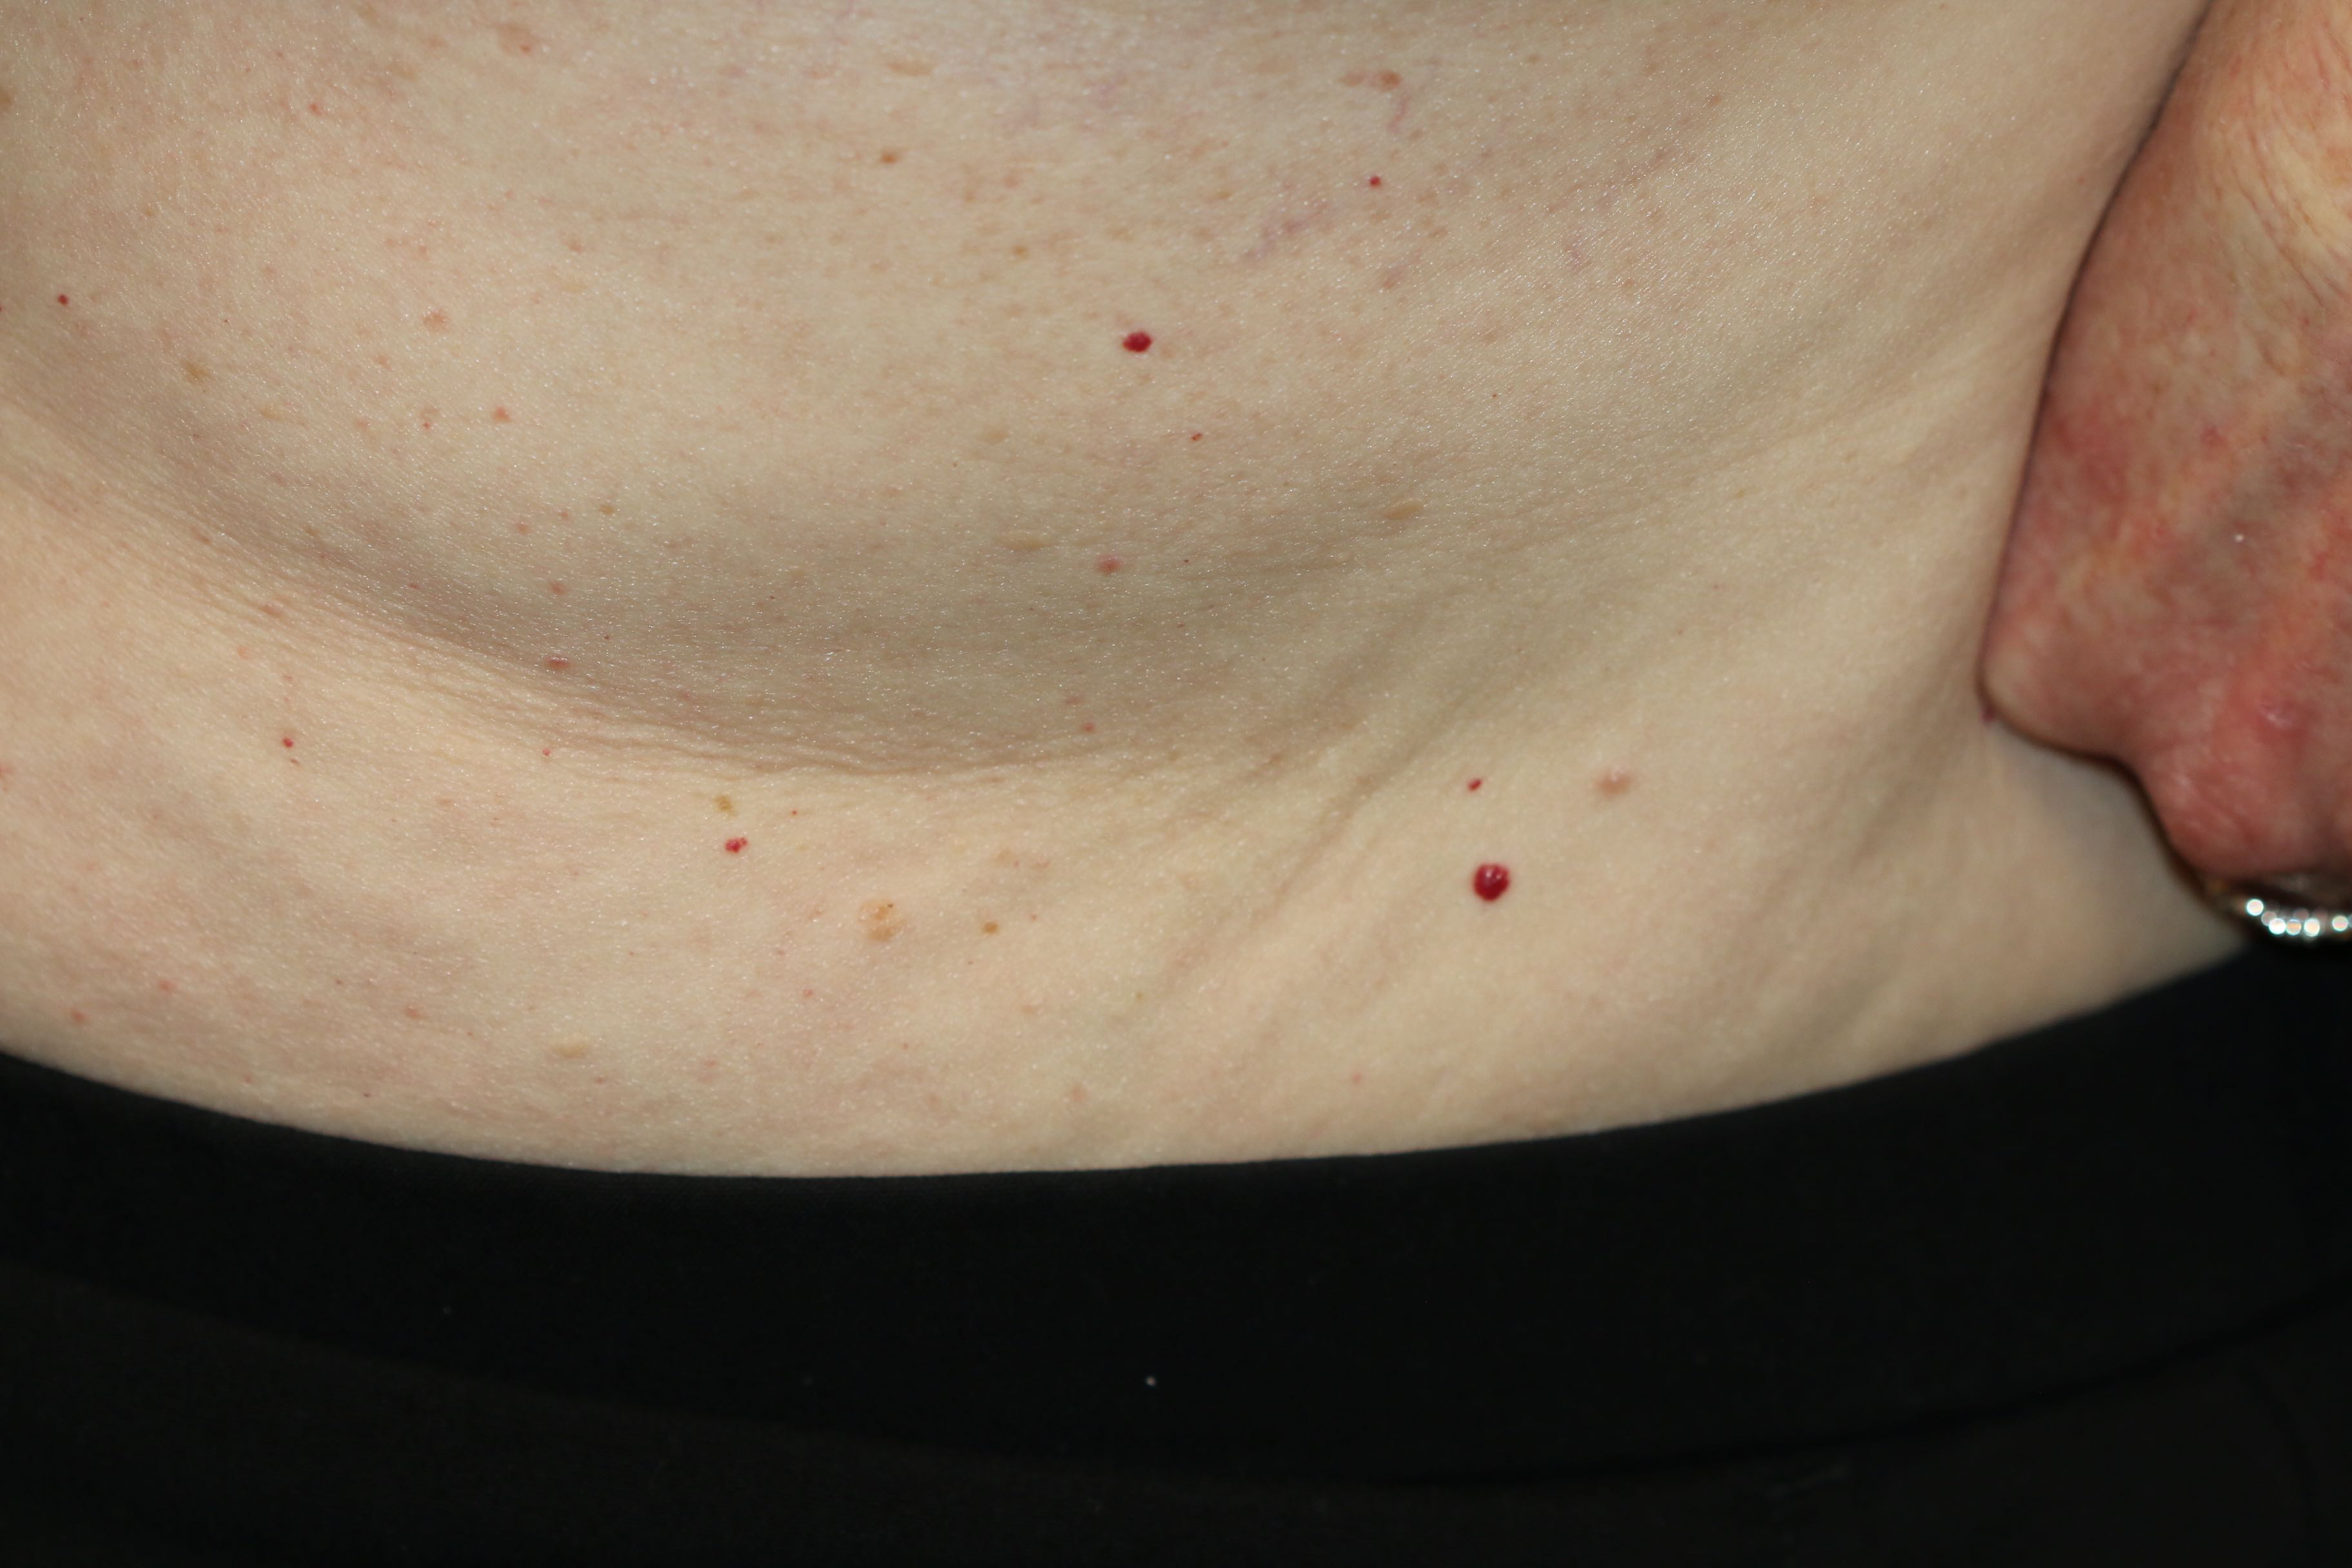 Campbell de Moran spots (cherry hemangiomas) on the trunk of a 78-year-old female